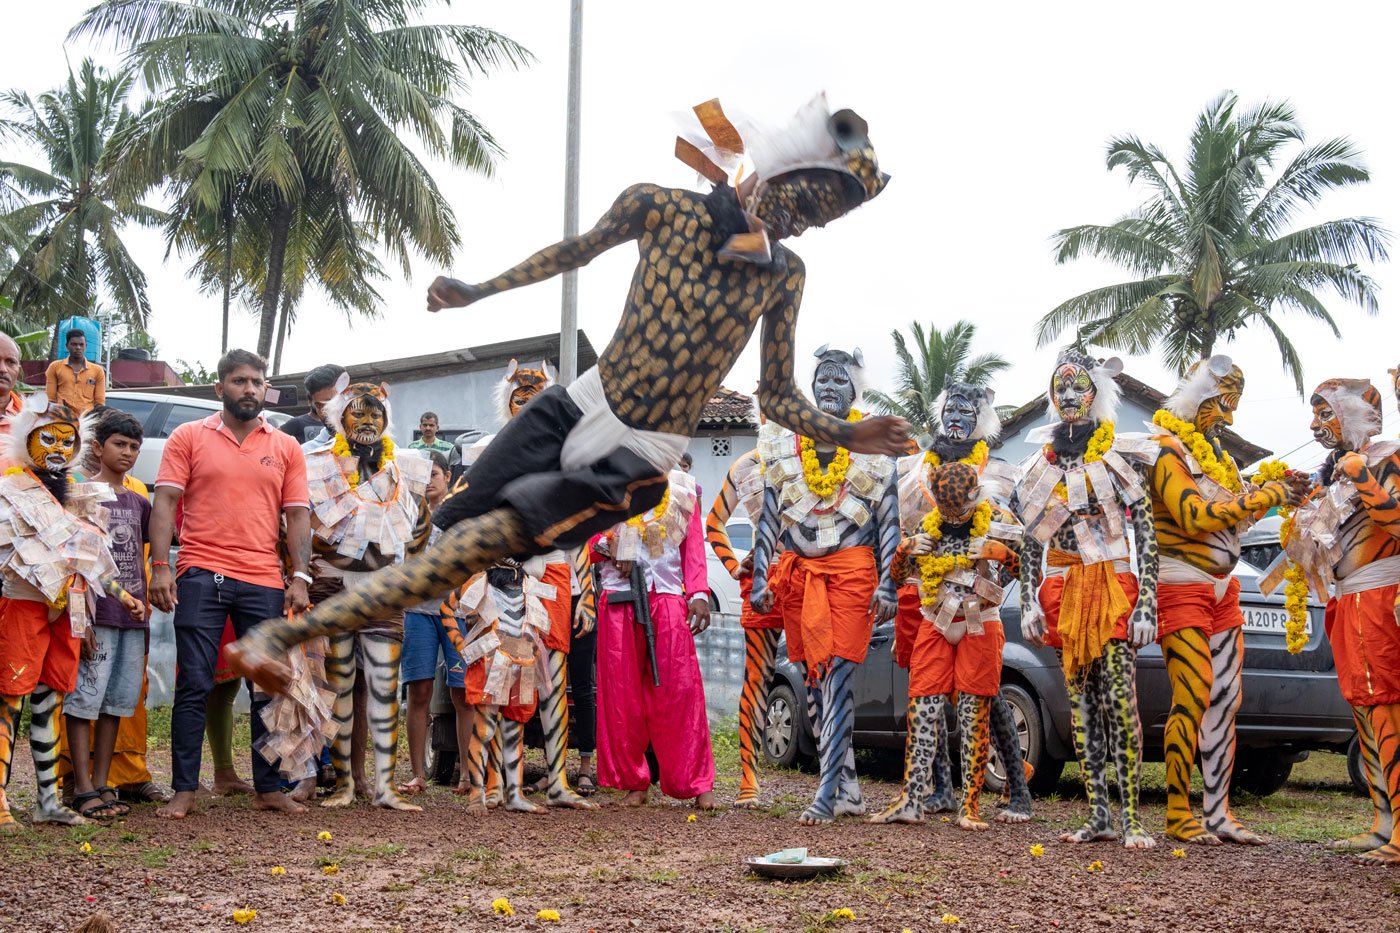 Prajwal Acharya painted as a black tiger shows his stunt skills. The traditional steps in this dance routine have become acrobatic with more emphasis on stunts